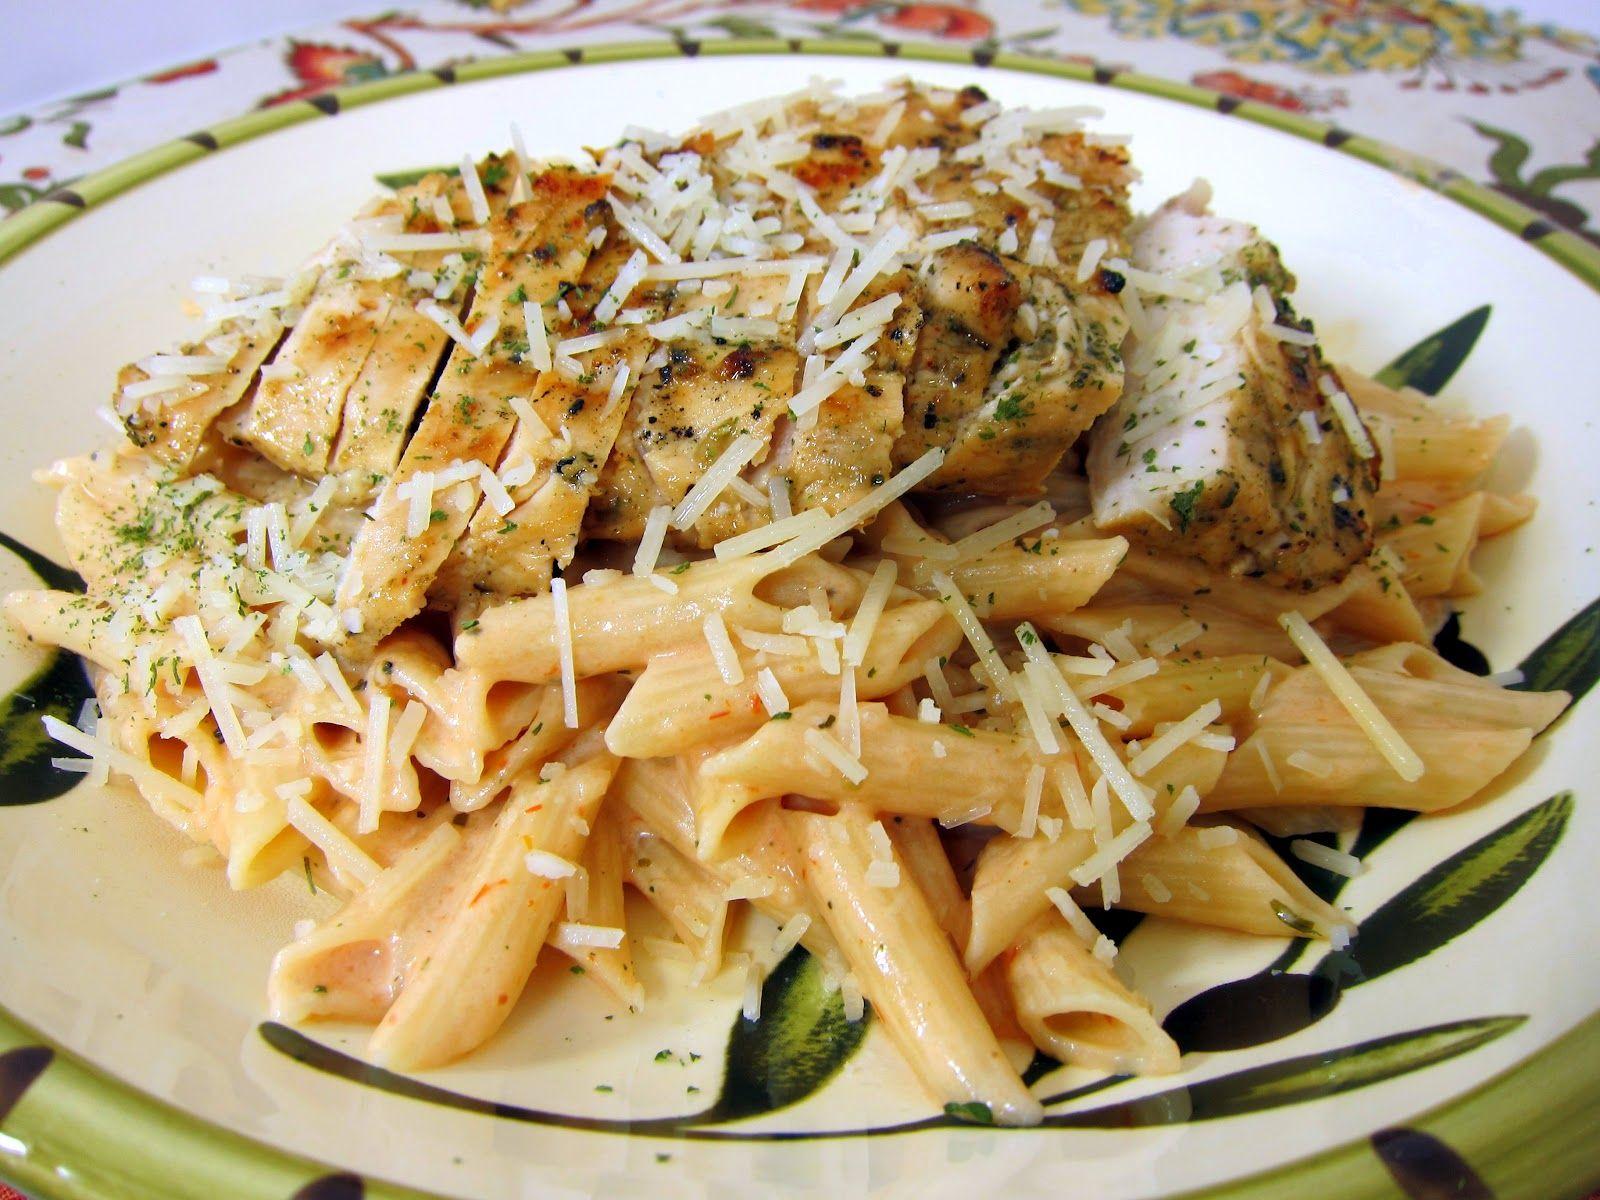 Grilled Chicken over Tomato Alfredo Sauce